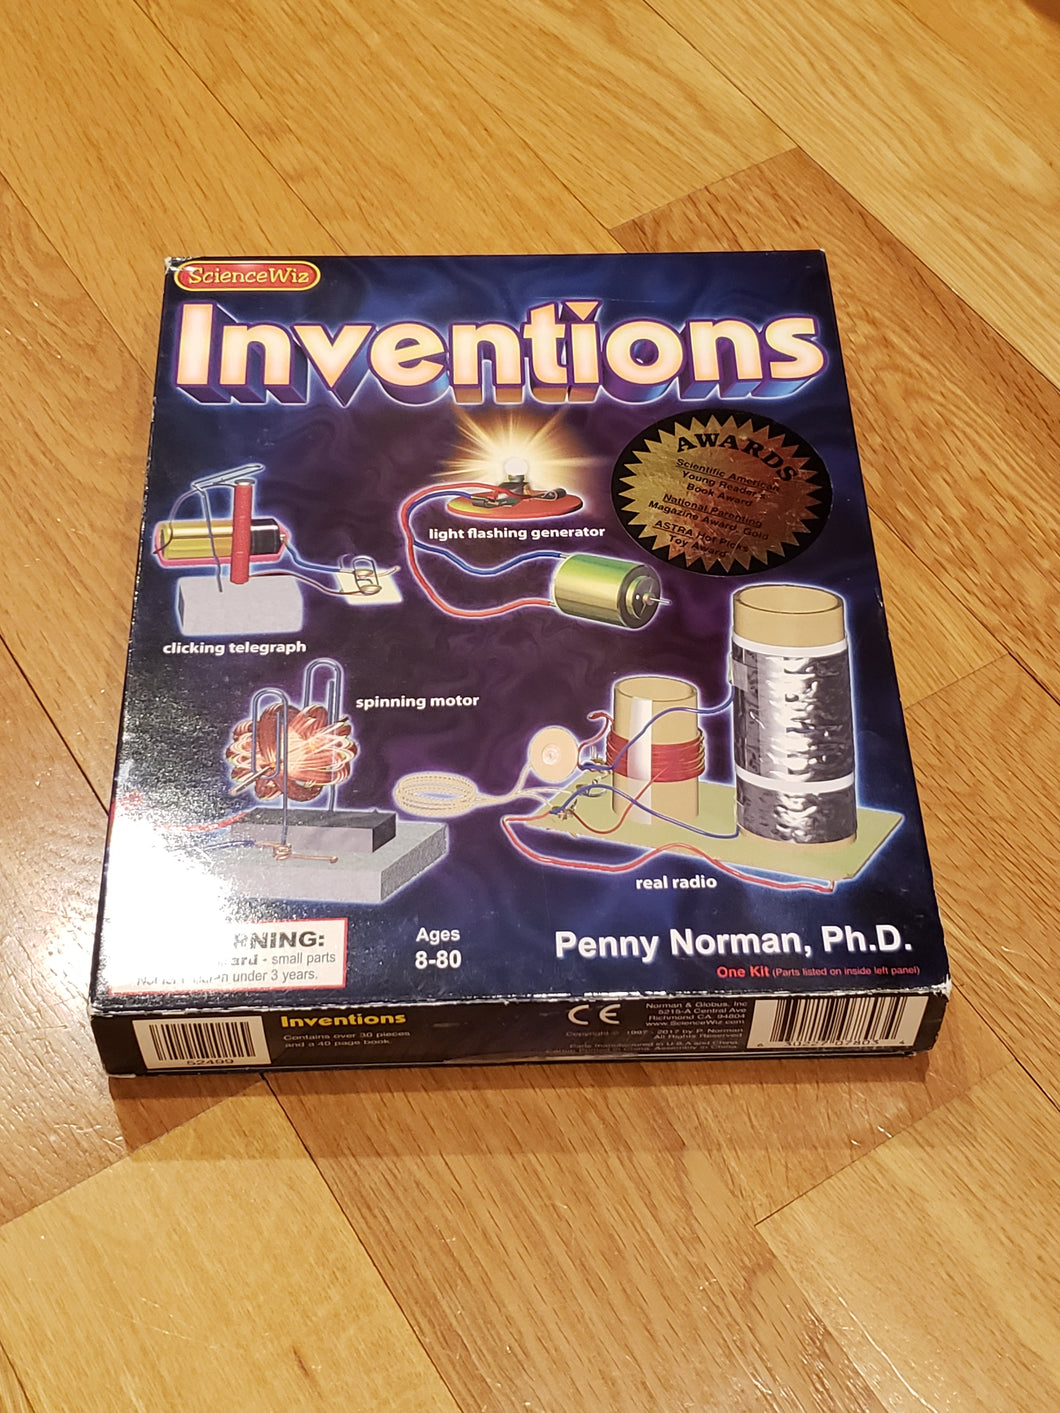 Science Wiz Inventions Kit.  Includes book and experiment items